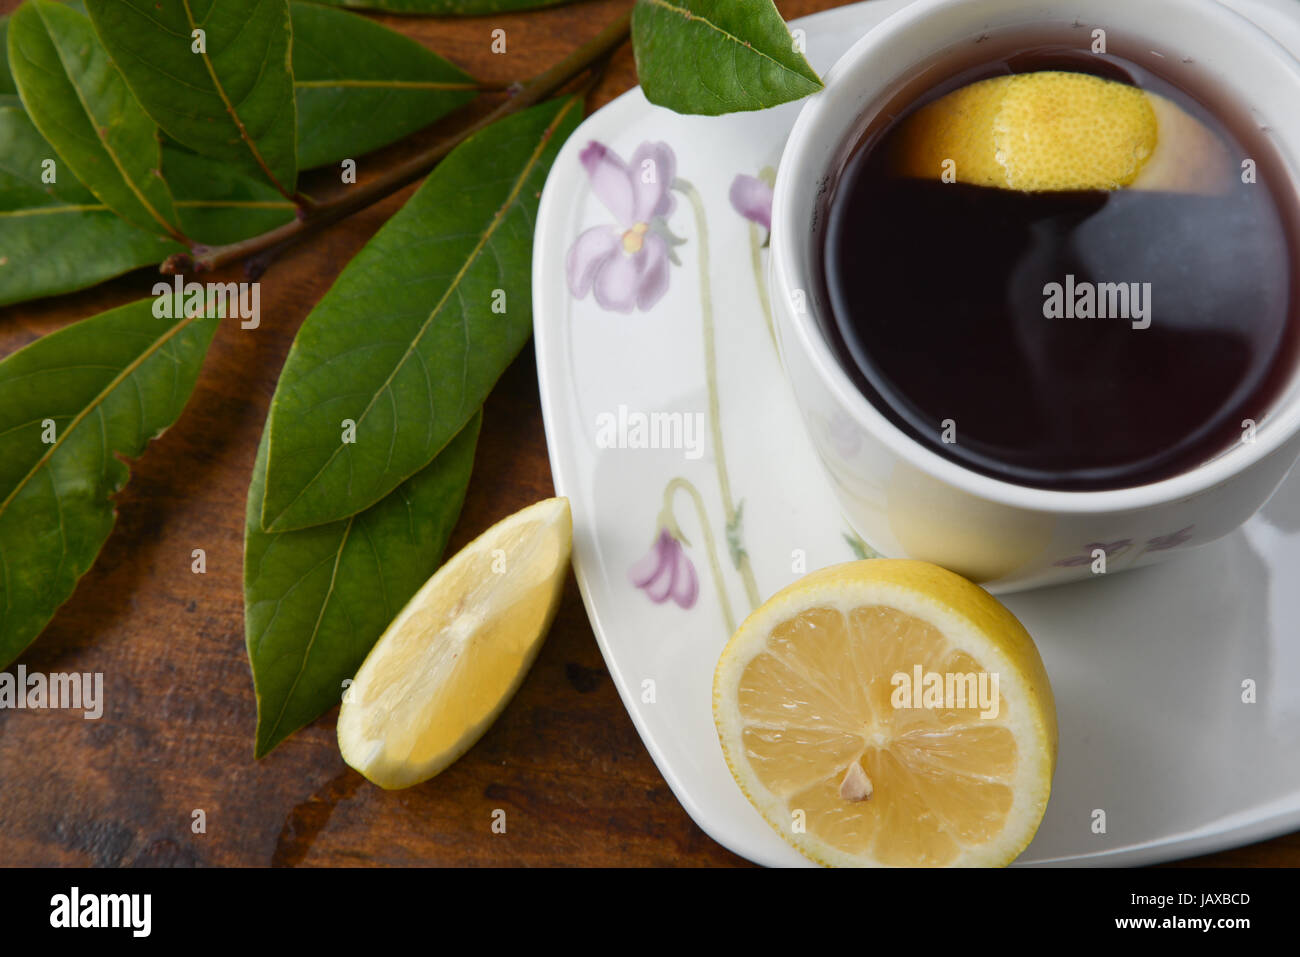 Infusion of various fruits flavored with a slice of lemon. relaxing drink Stock Photo